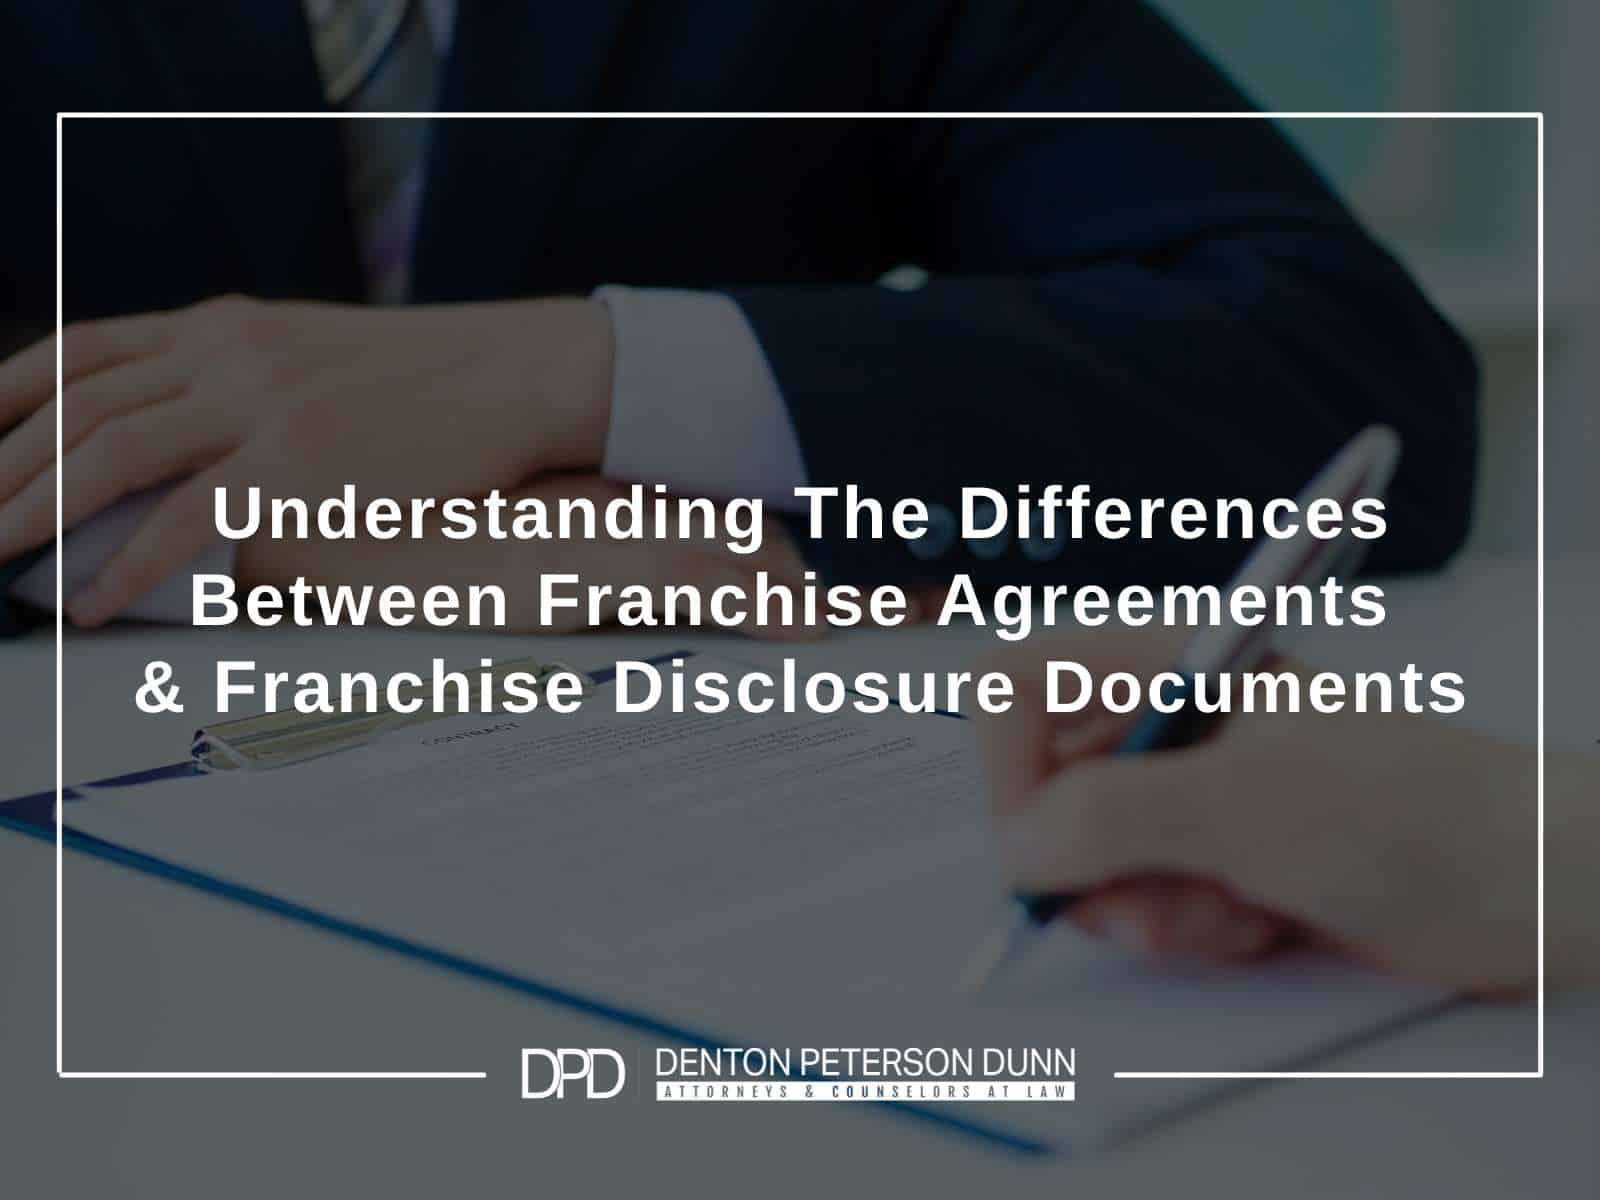 Understanding The Differences Between Franchise Agreements & Franchise Disclosure Documents